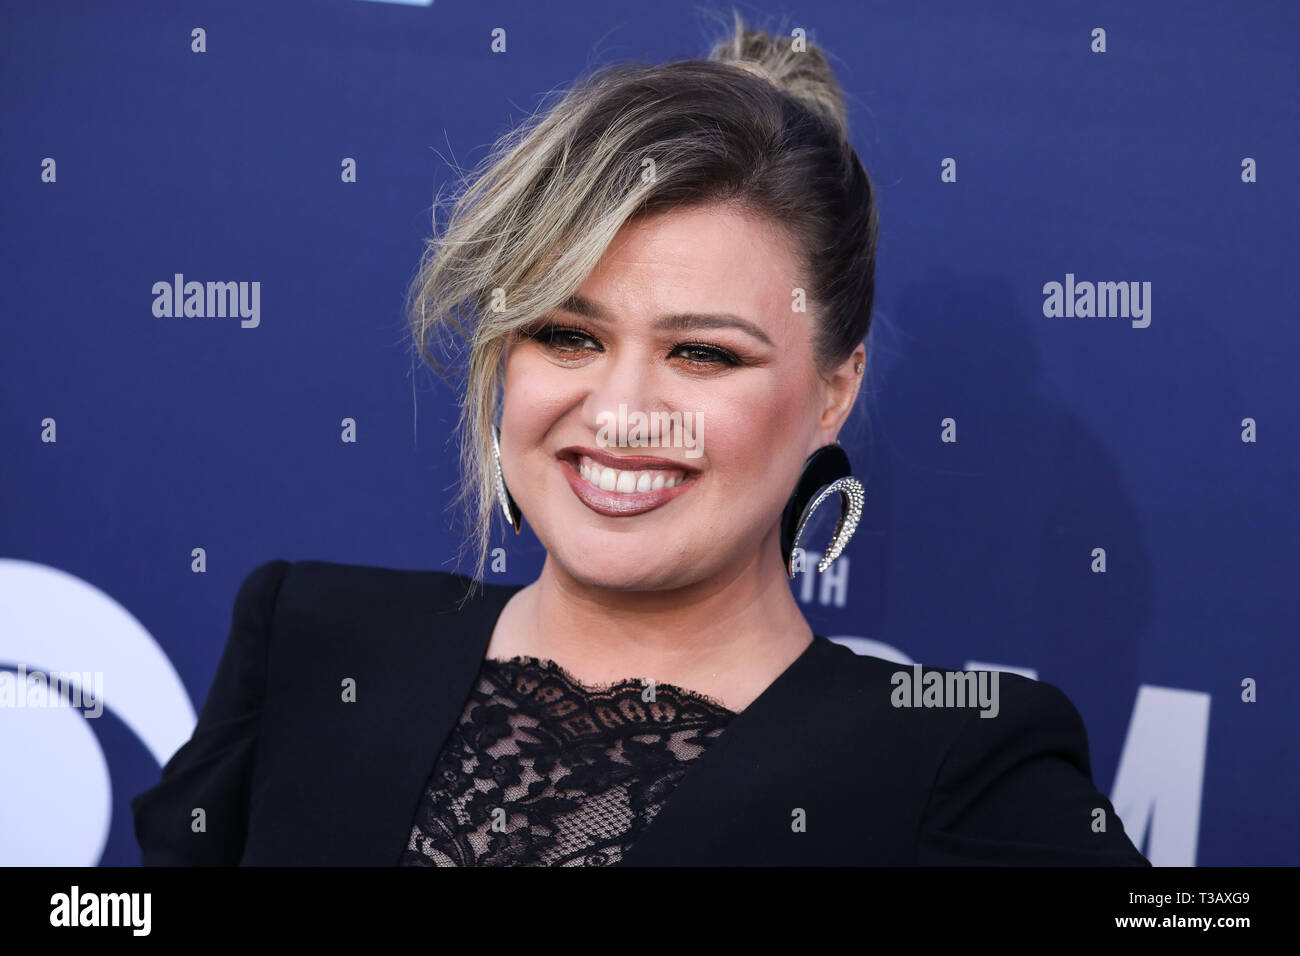 Las Vegas, United States. 07th Apr, 2019. LAS VEGAS, NEVADA, USA - APRIL 07: Singer Kelly Clarkson wearing an Alexander McQueen dress, Yves Saint Laurent earrings, and Balmain shoes arrives at the 54th Academy Of Country Music Awards held at the MGM Grand Garden Arena on April 7, 2019 in Las Vegas, Nevada, United States. (Photo by Xavier Collin/Image Press Agency) Credit: Image Press Agency/Alamy Live News Stock Photo